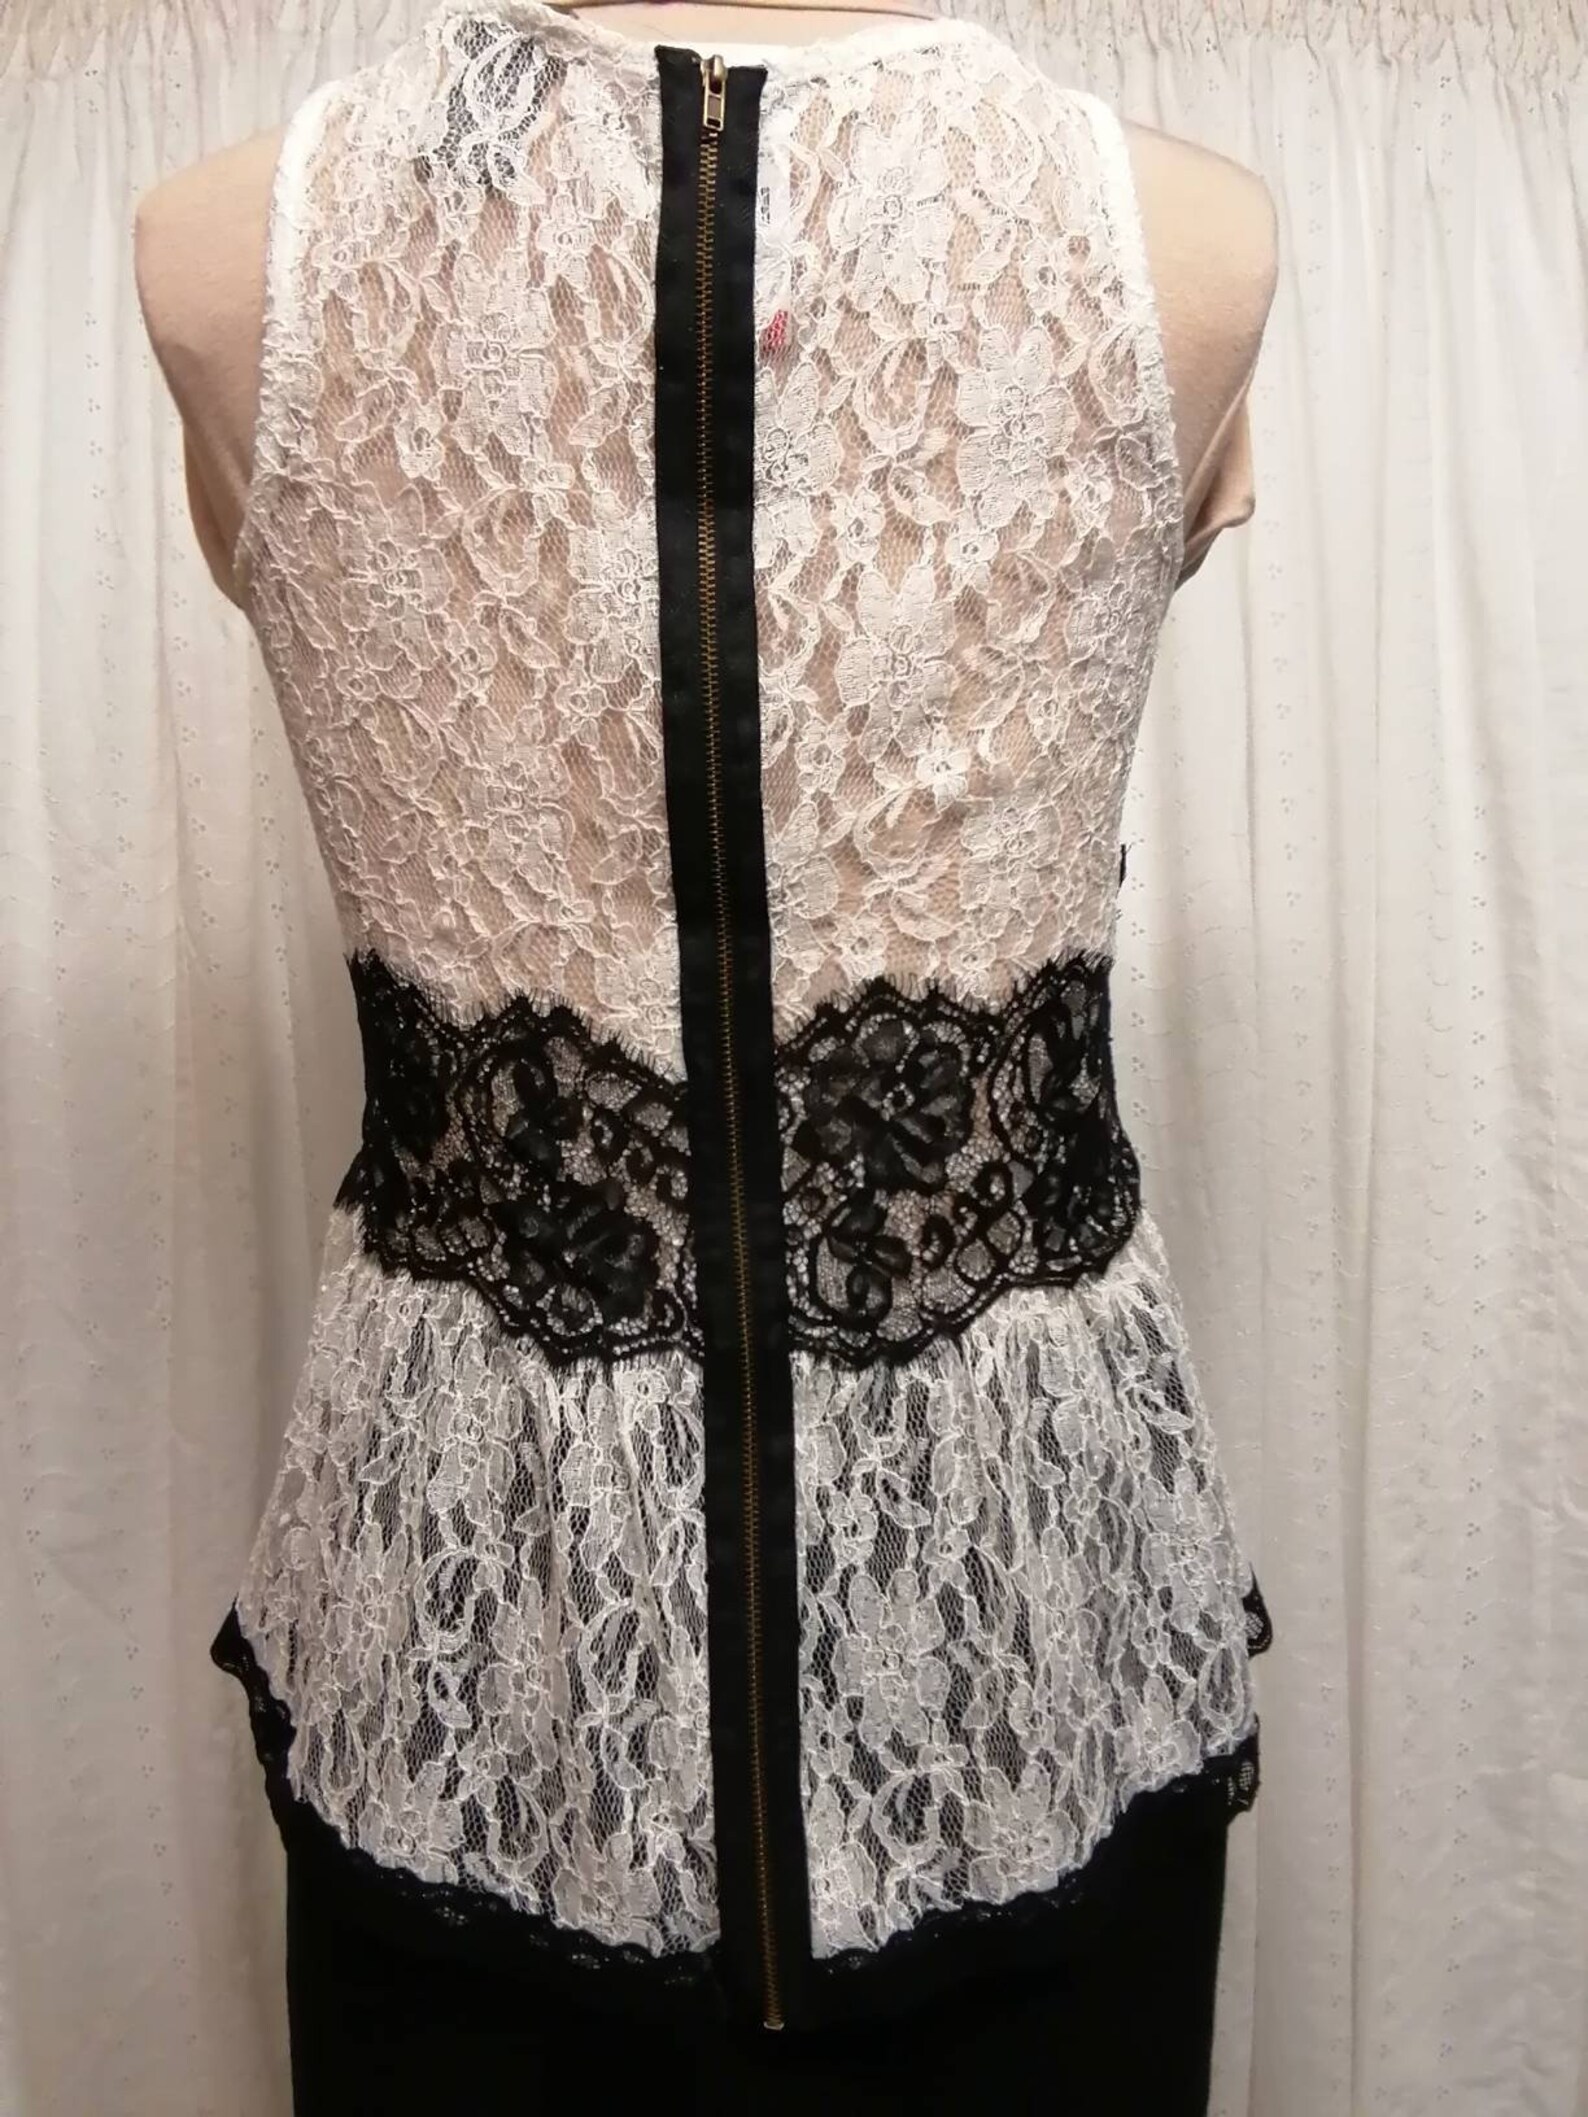 Black and White Lace Sheer Top Sleeveless Body Fitting Lace - Etsy